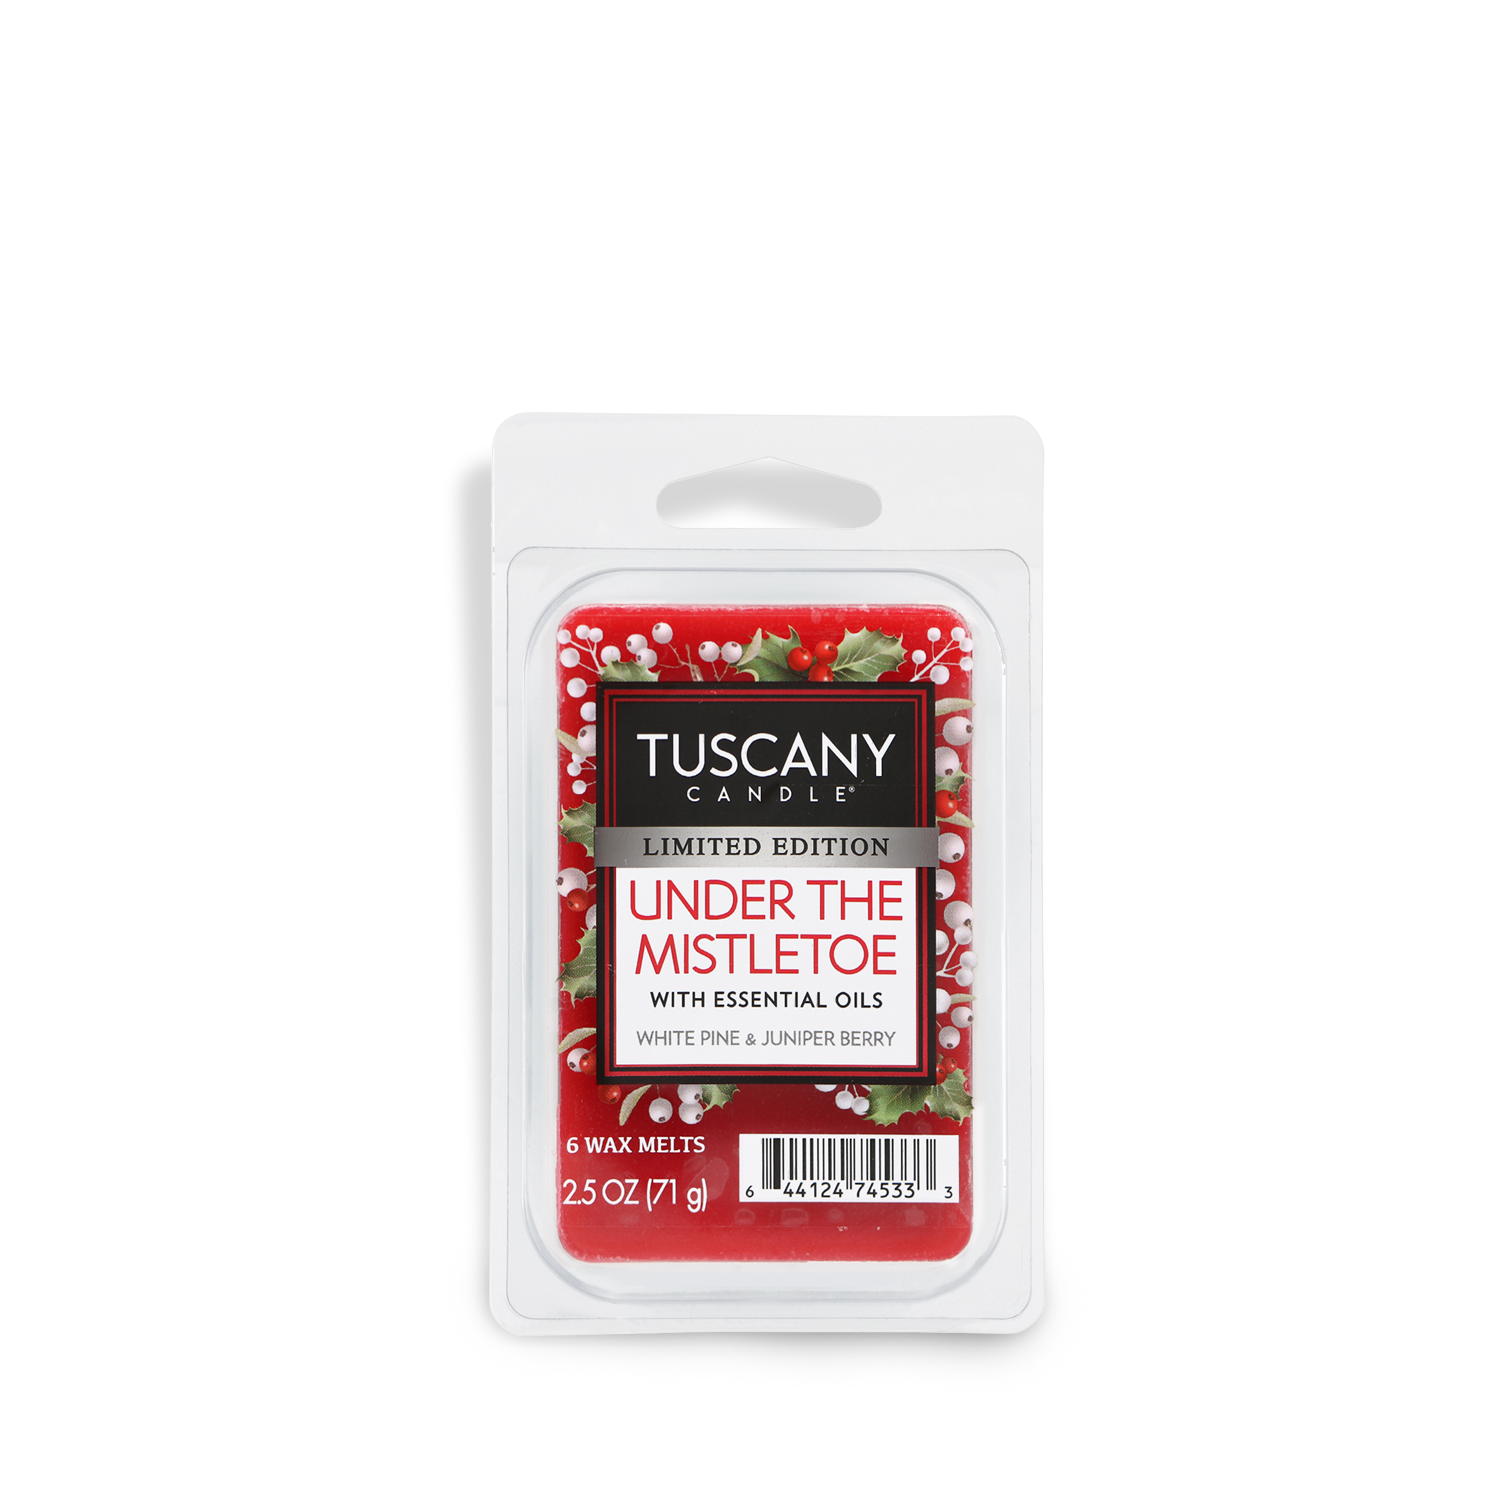 Tuscany Candle Winter Holiday Christmas 2015 Limited Edition Scented Wax  Melts Review